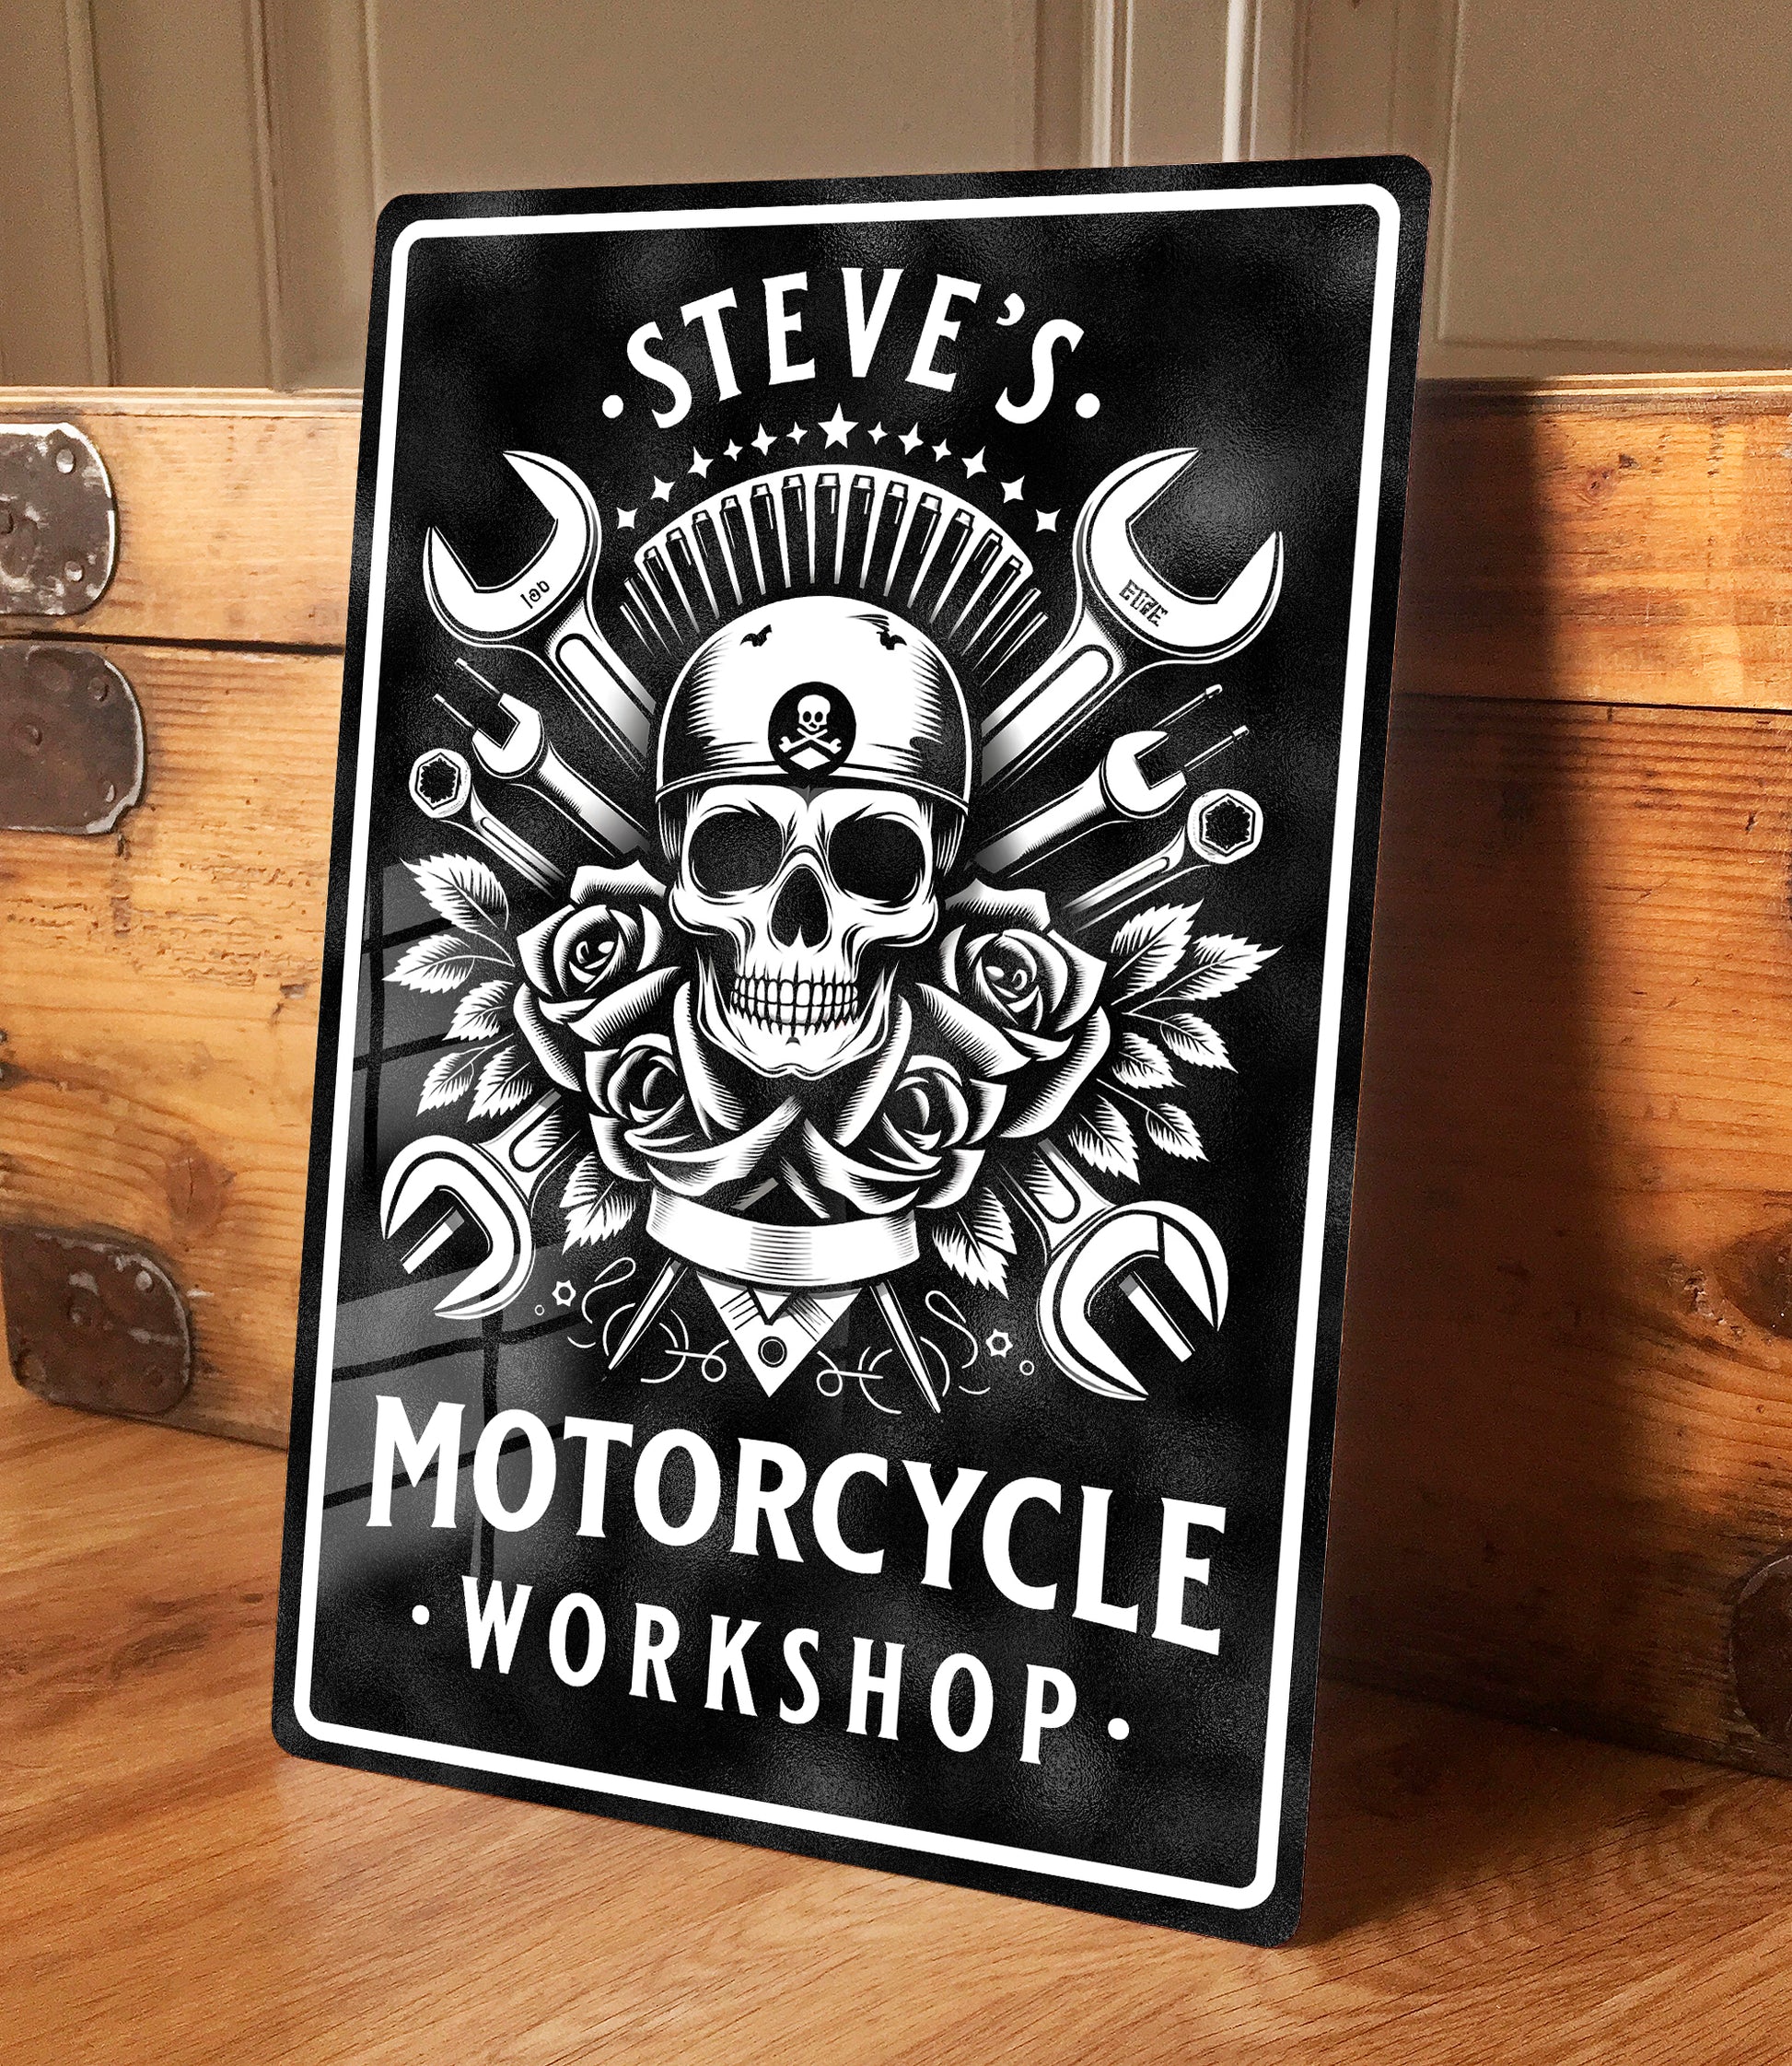 Personalised Motorcycle Workshop Metal Sign depicting skull and crossbones style graphic with mechanics tools